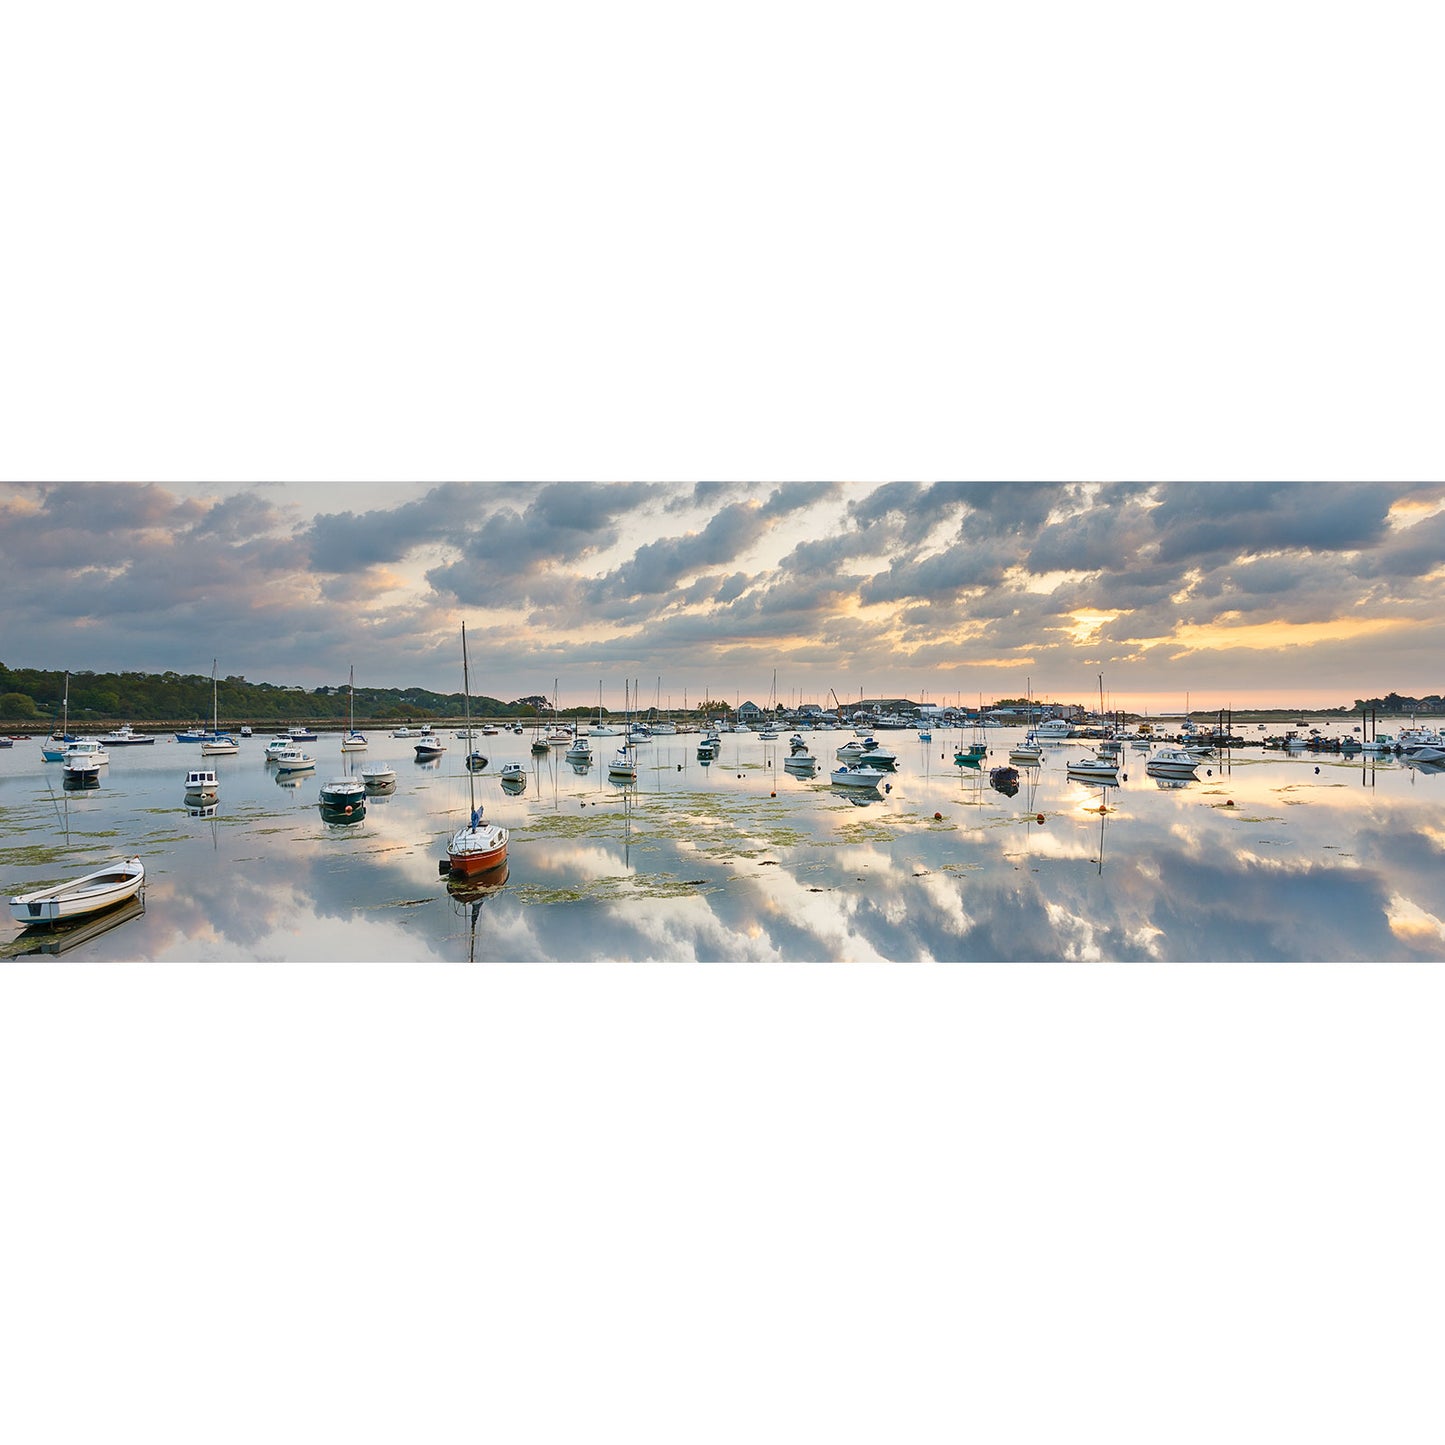 Sailboats moored in Bembridge Harbour at sunset with reflective water near Wight, captured by Available Light Photography.